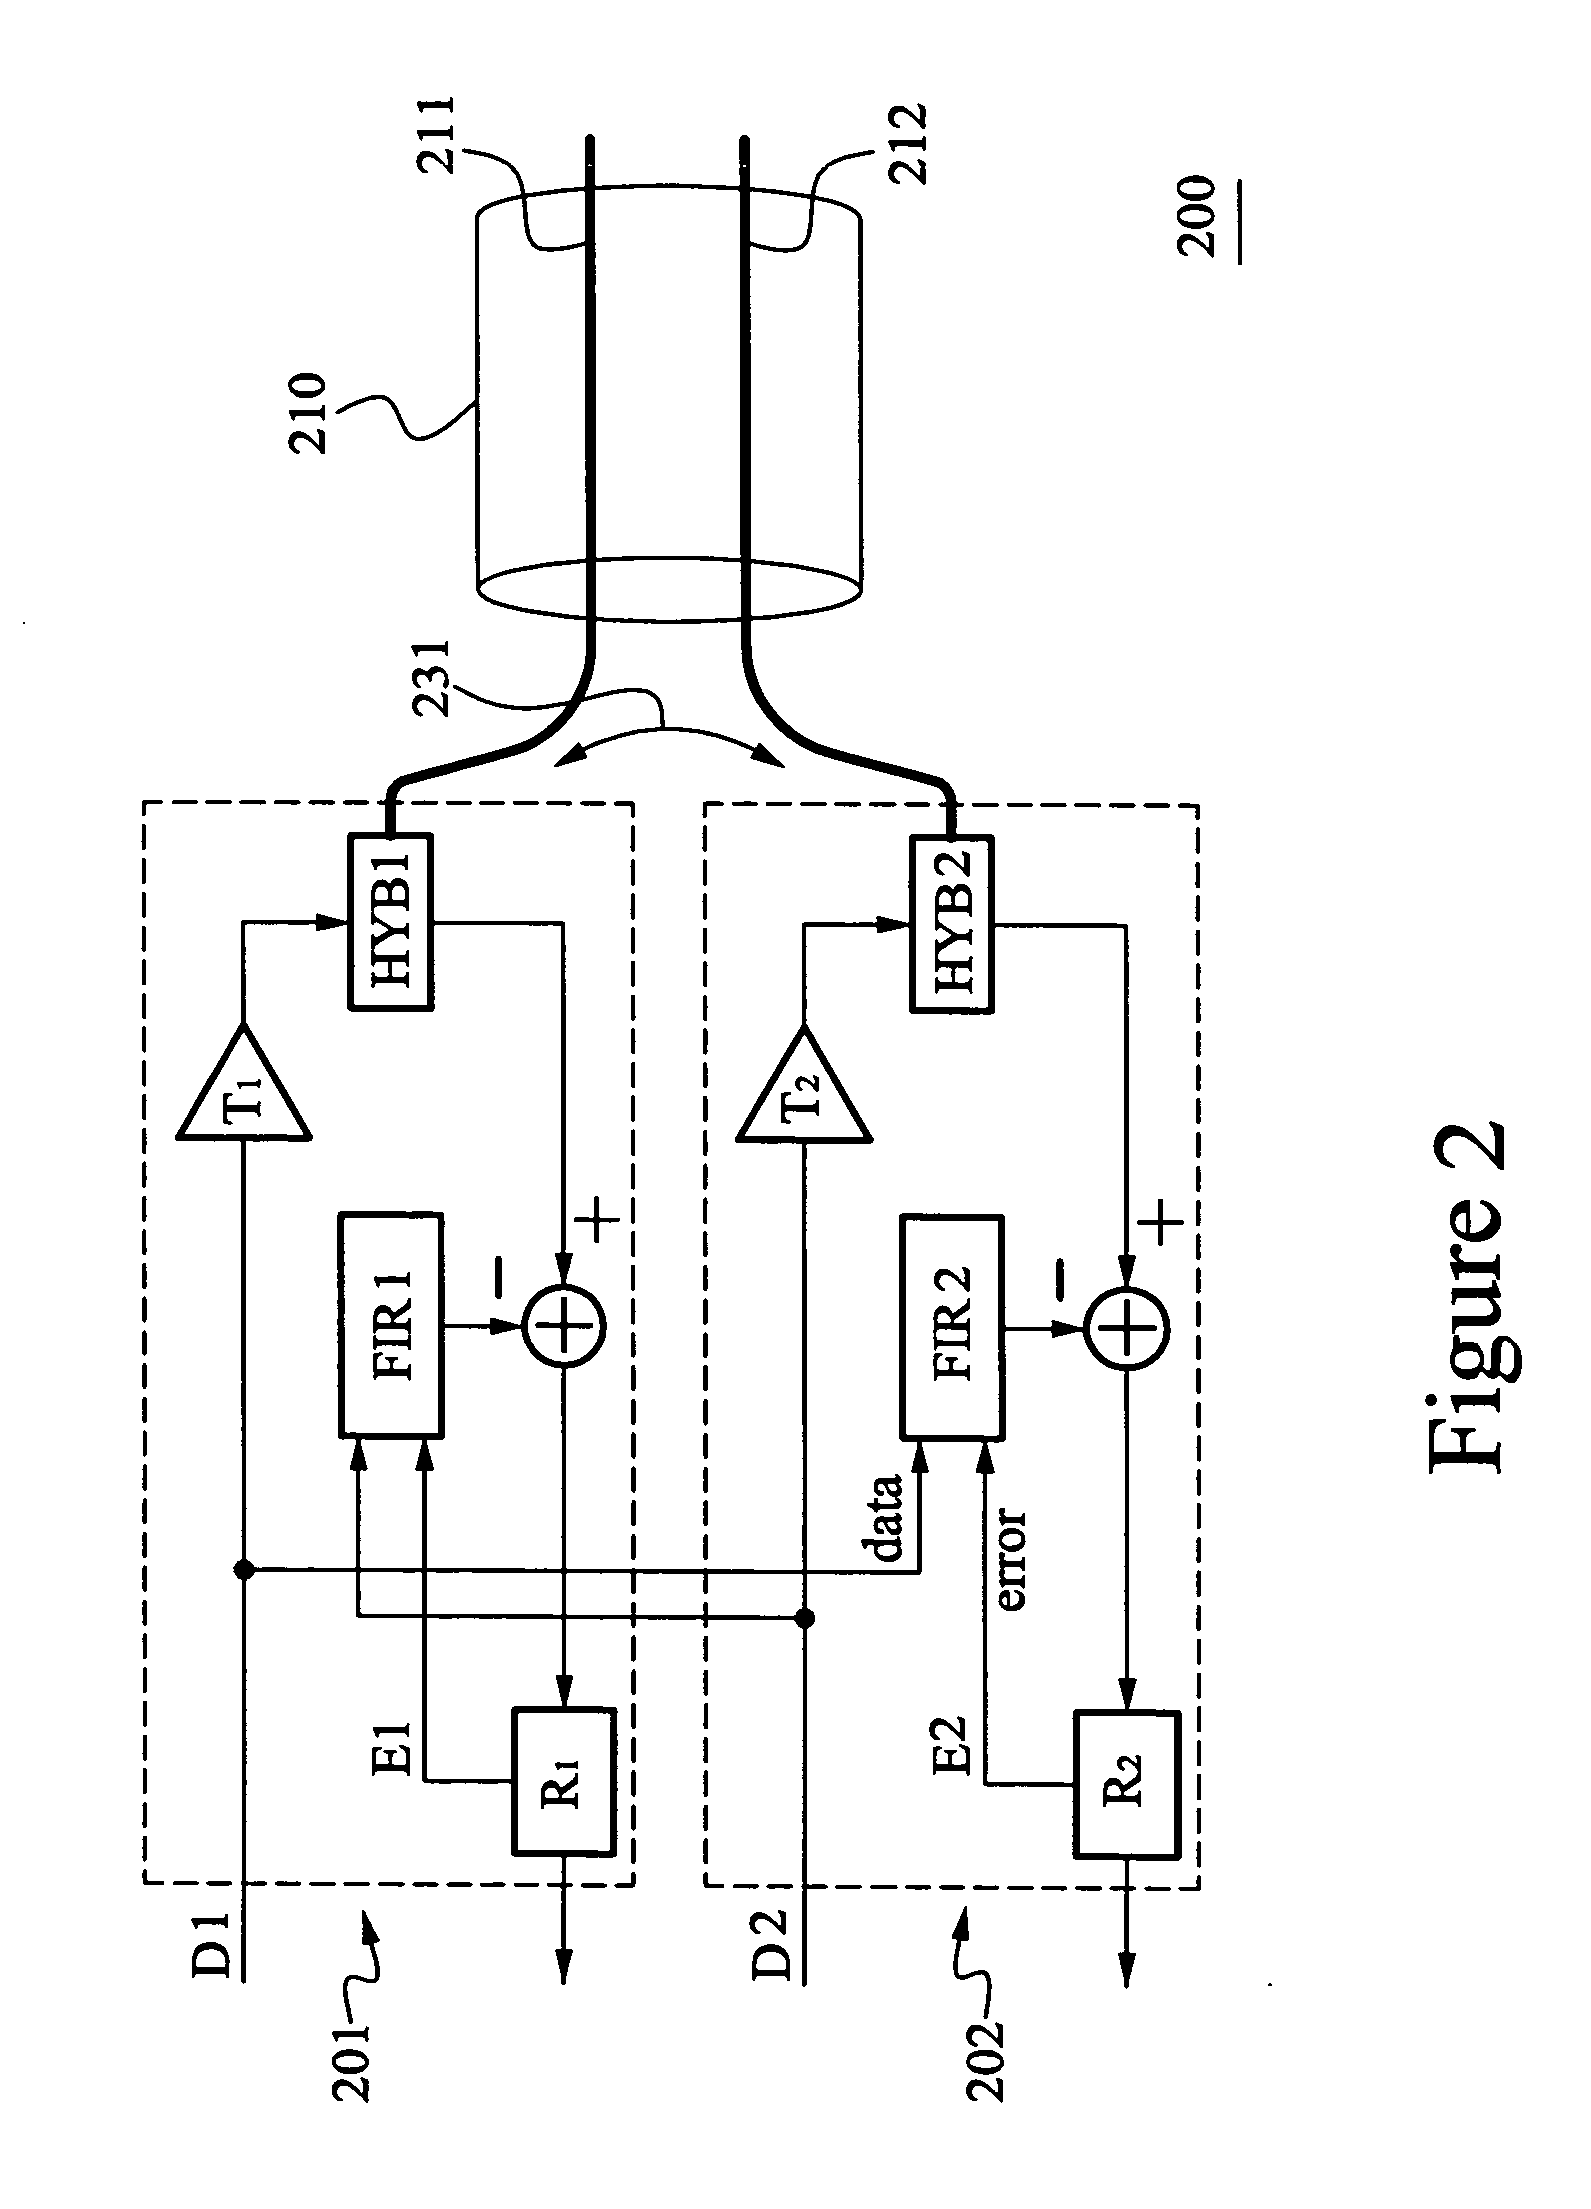 System, method and apparatus for crosstalk cancellation